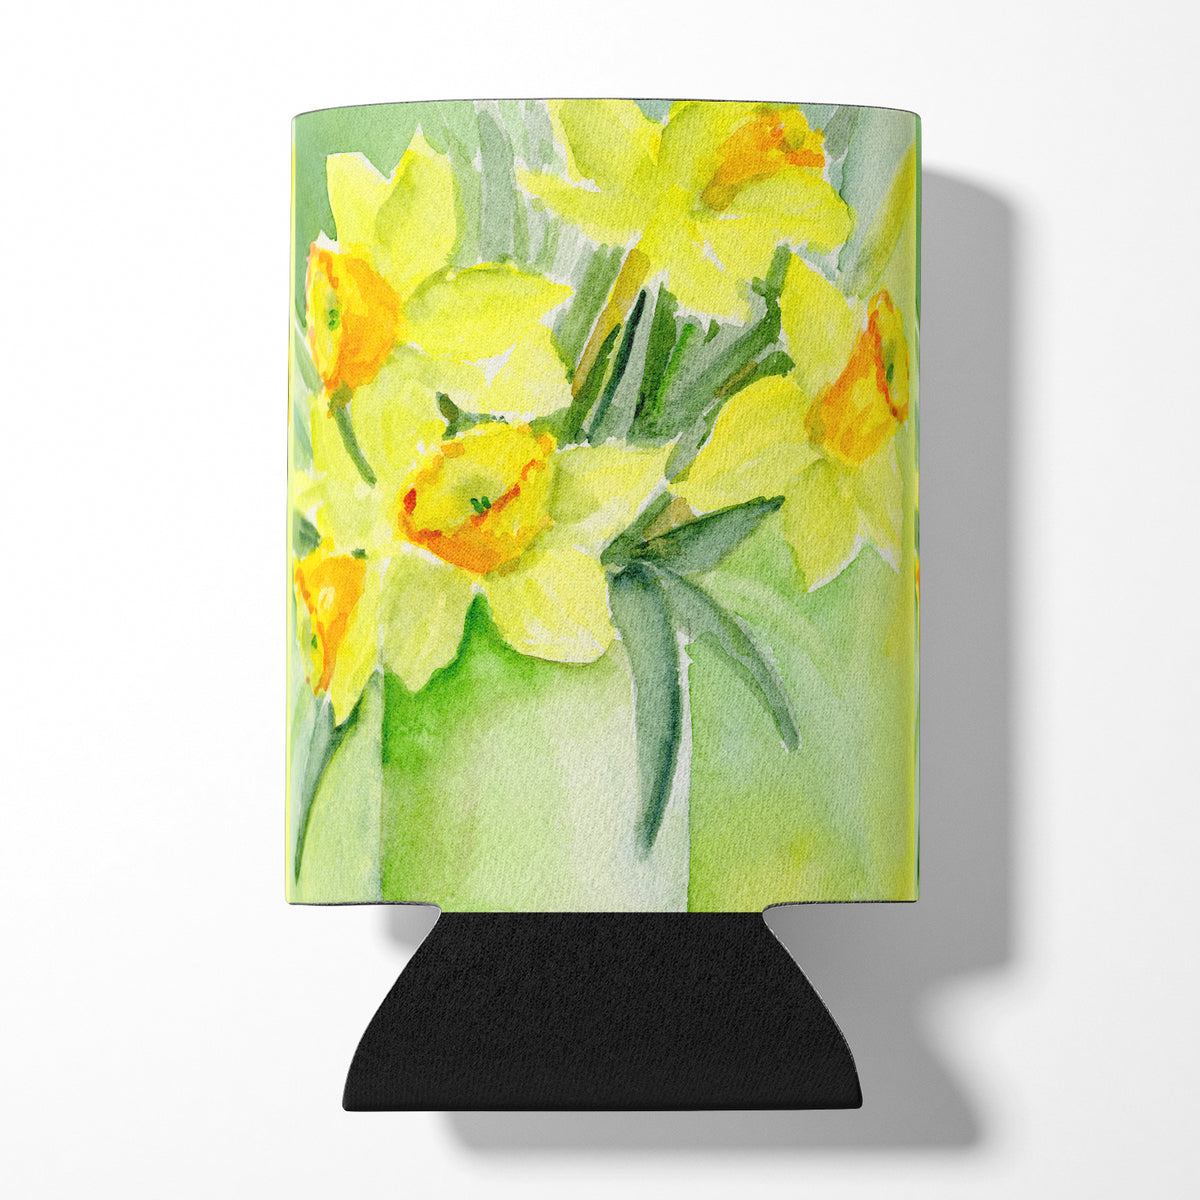 Daffodils by Maureen Bonfield Can or Bottle Hugger BMBO970ACC